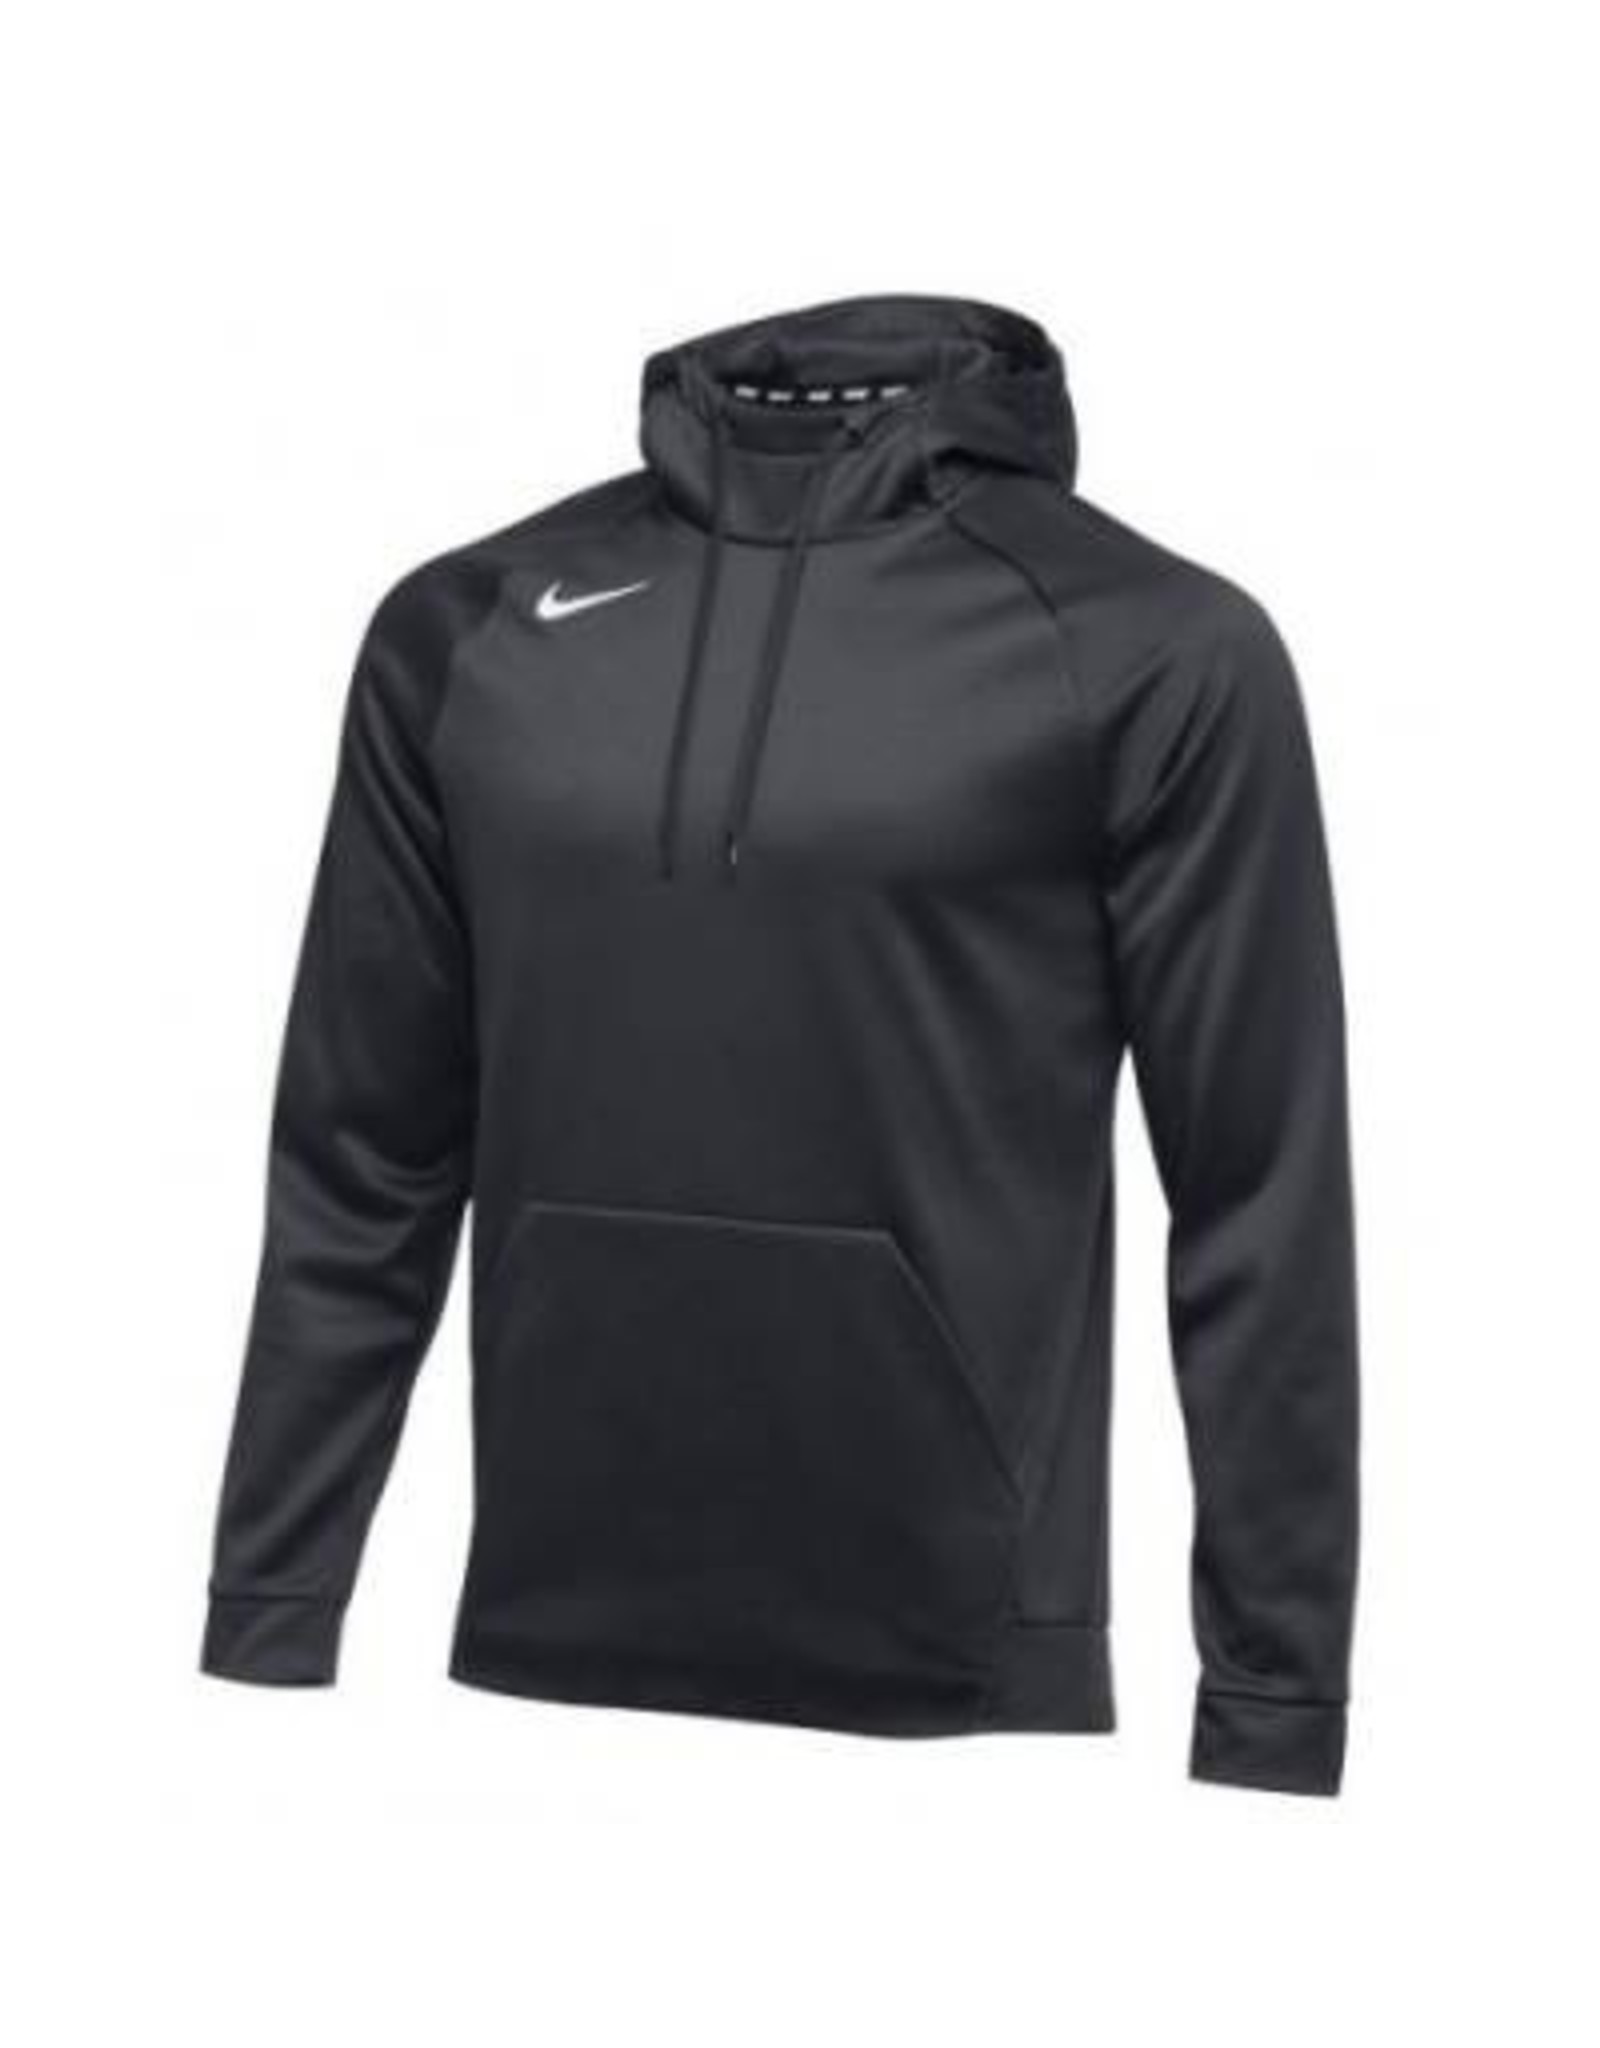 NON-UNIFORM Nike Hooded Pullover - Custom Adult Sizes